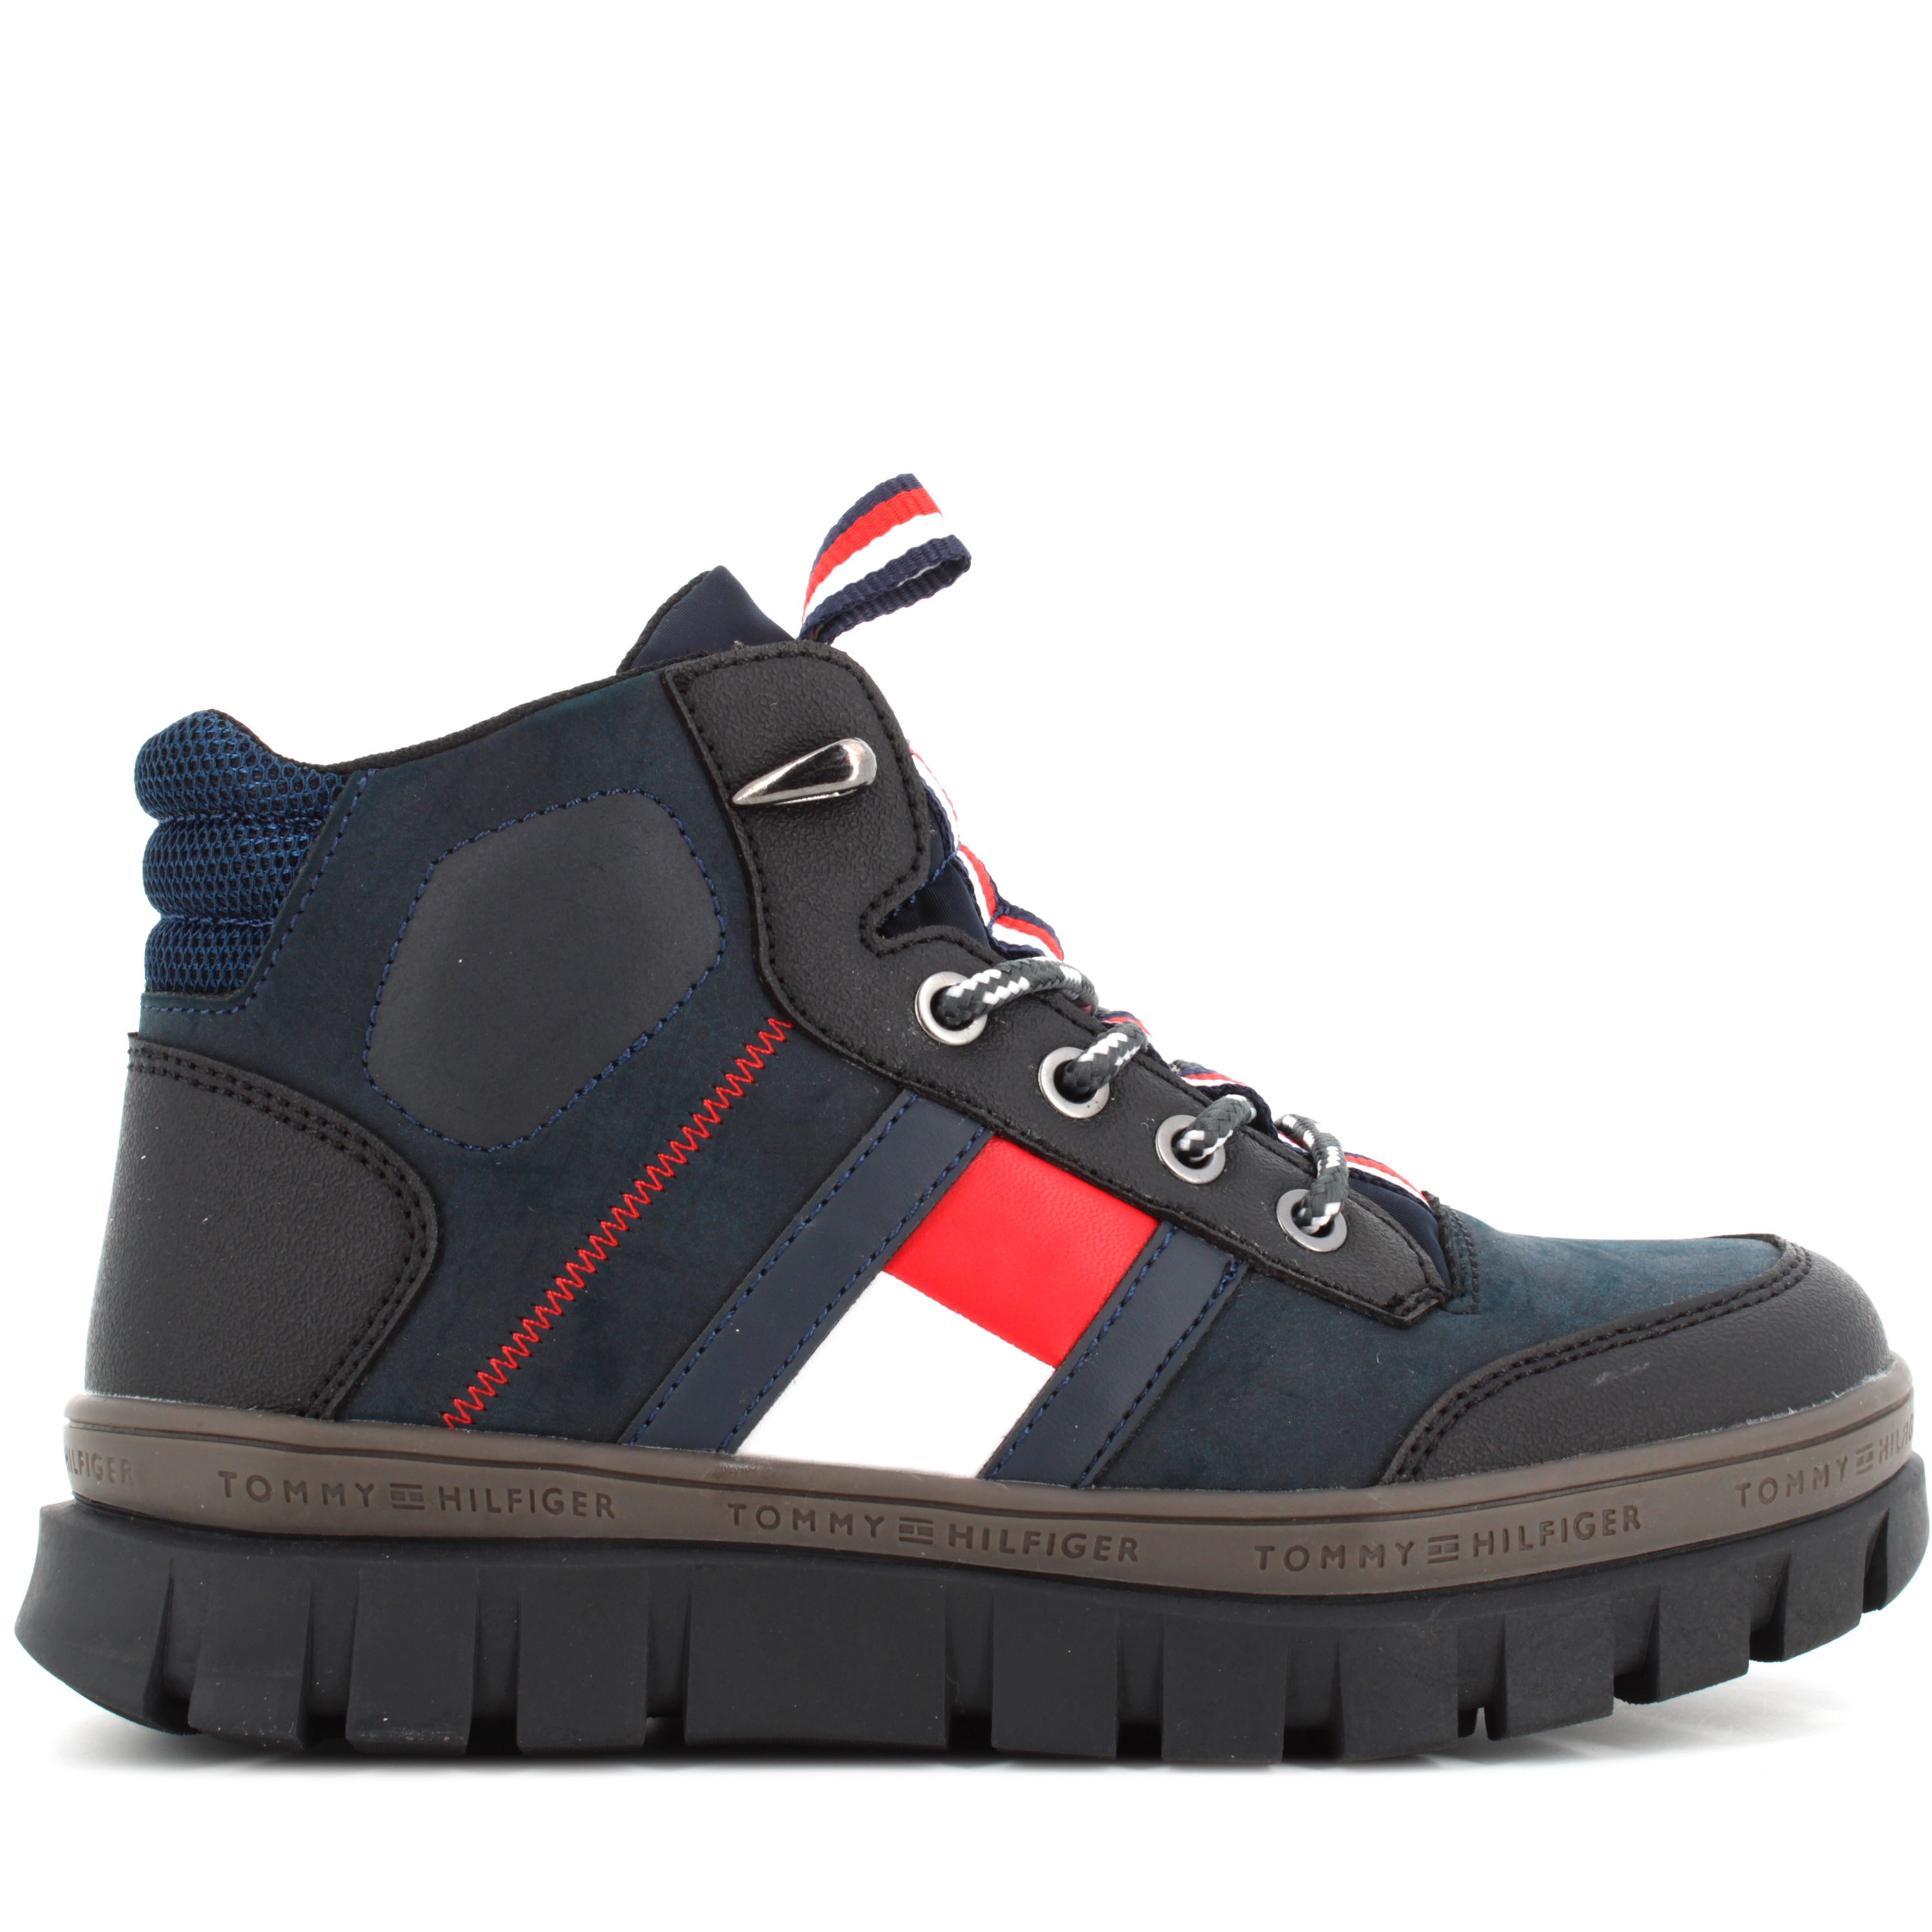 Tommy Hilfiger A21g Kinder hohe Sneakers T3B5-32091-0622X598 (35/41)